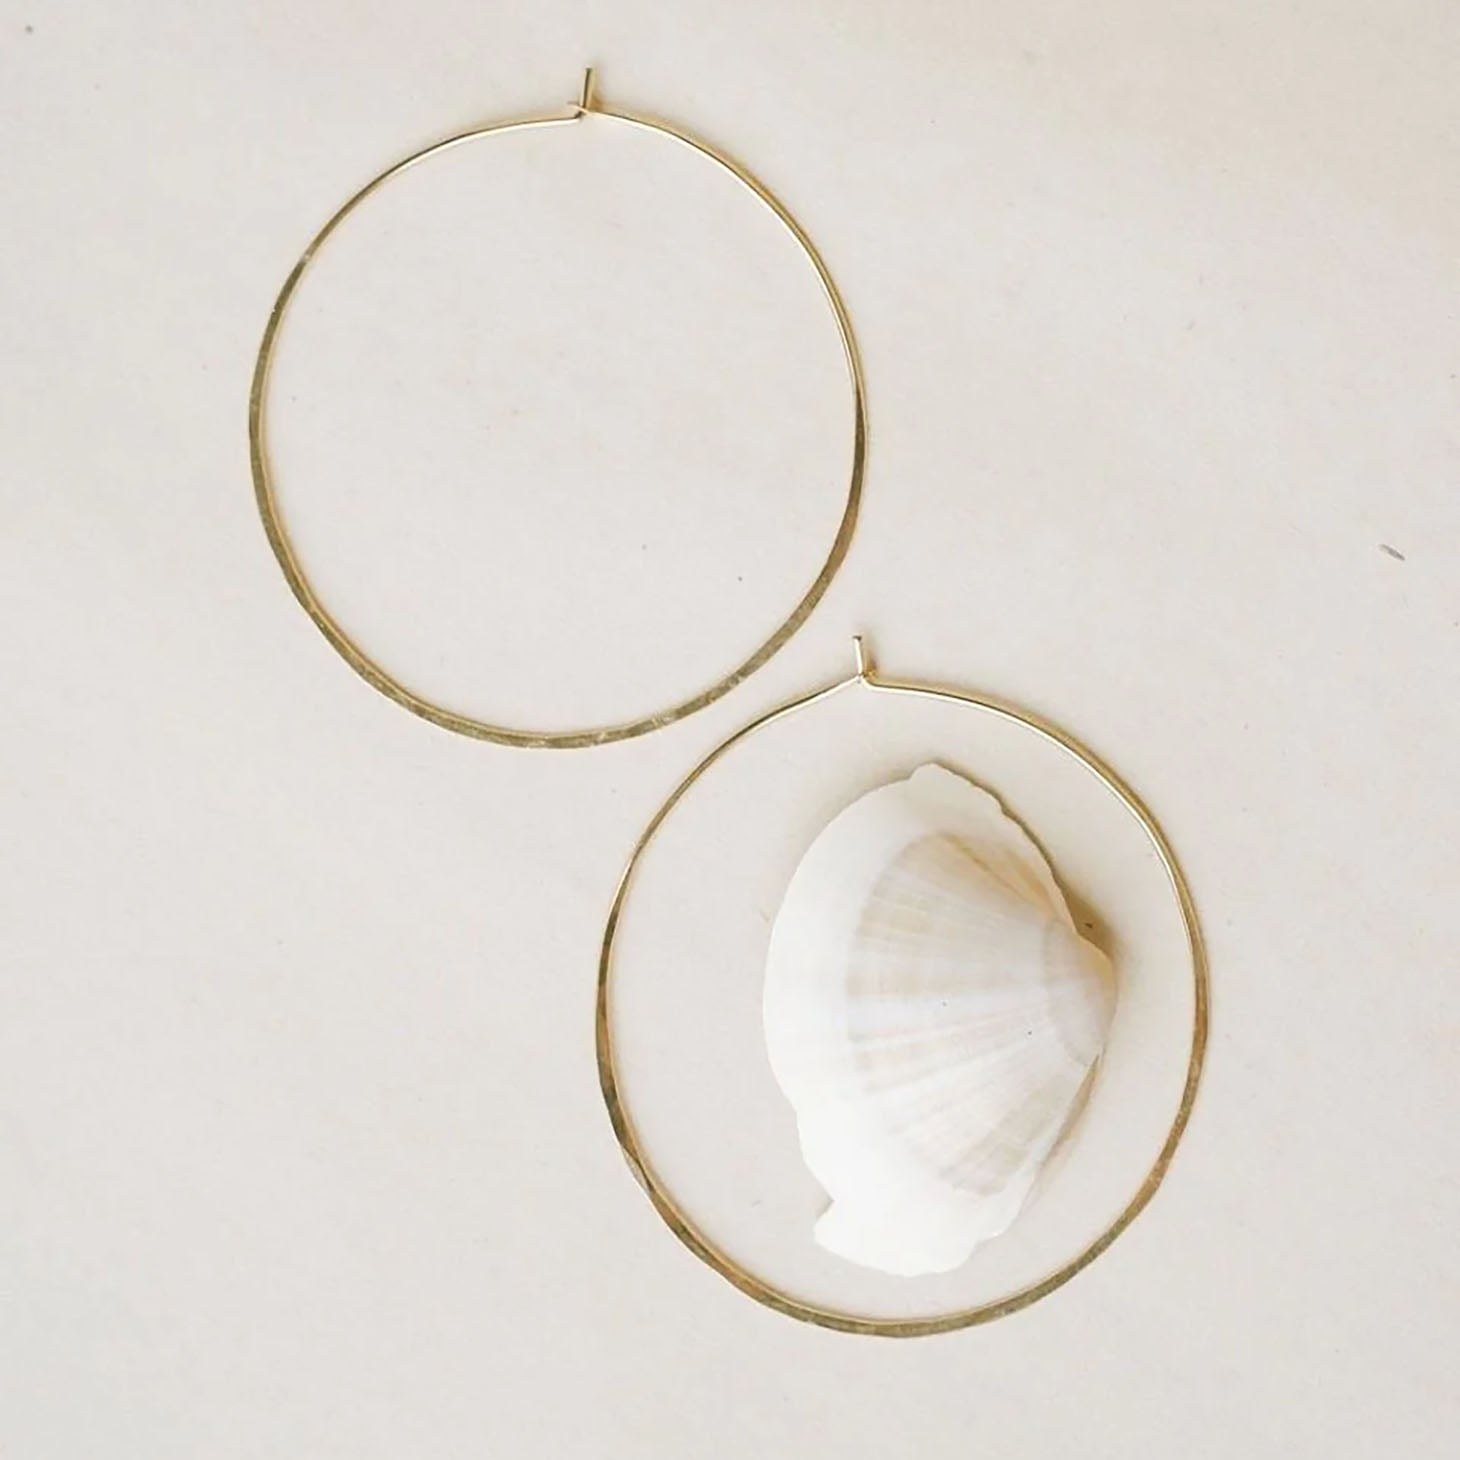 Extra Large 14K Gold Fill Hammered Hoop Earrings